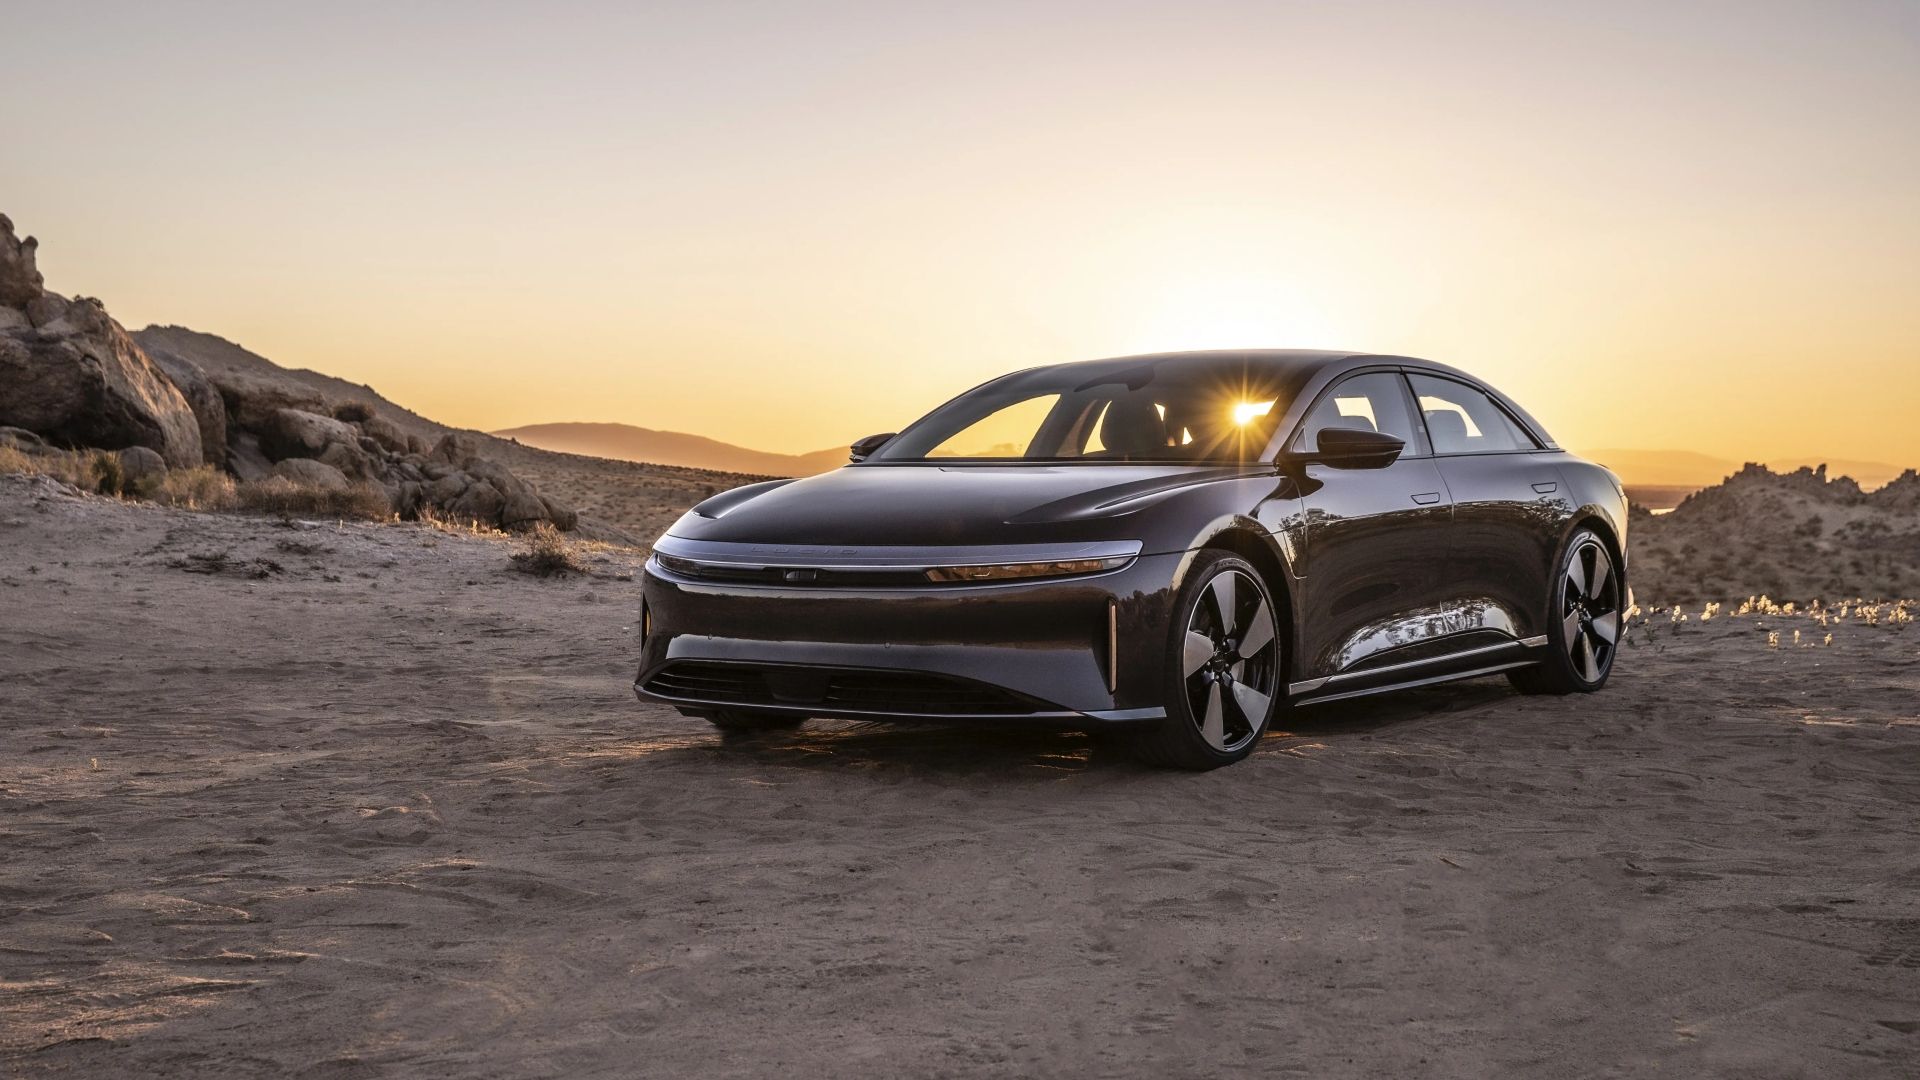 2024 Lucid Air Grand Touring front three-quarters view in a desert